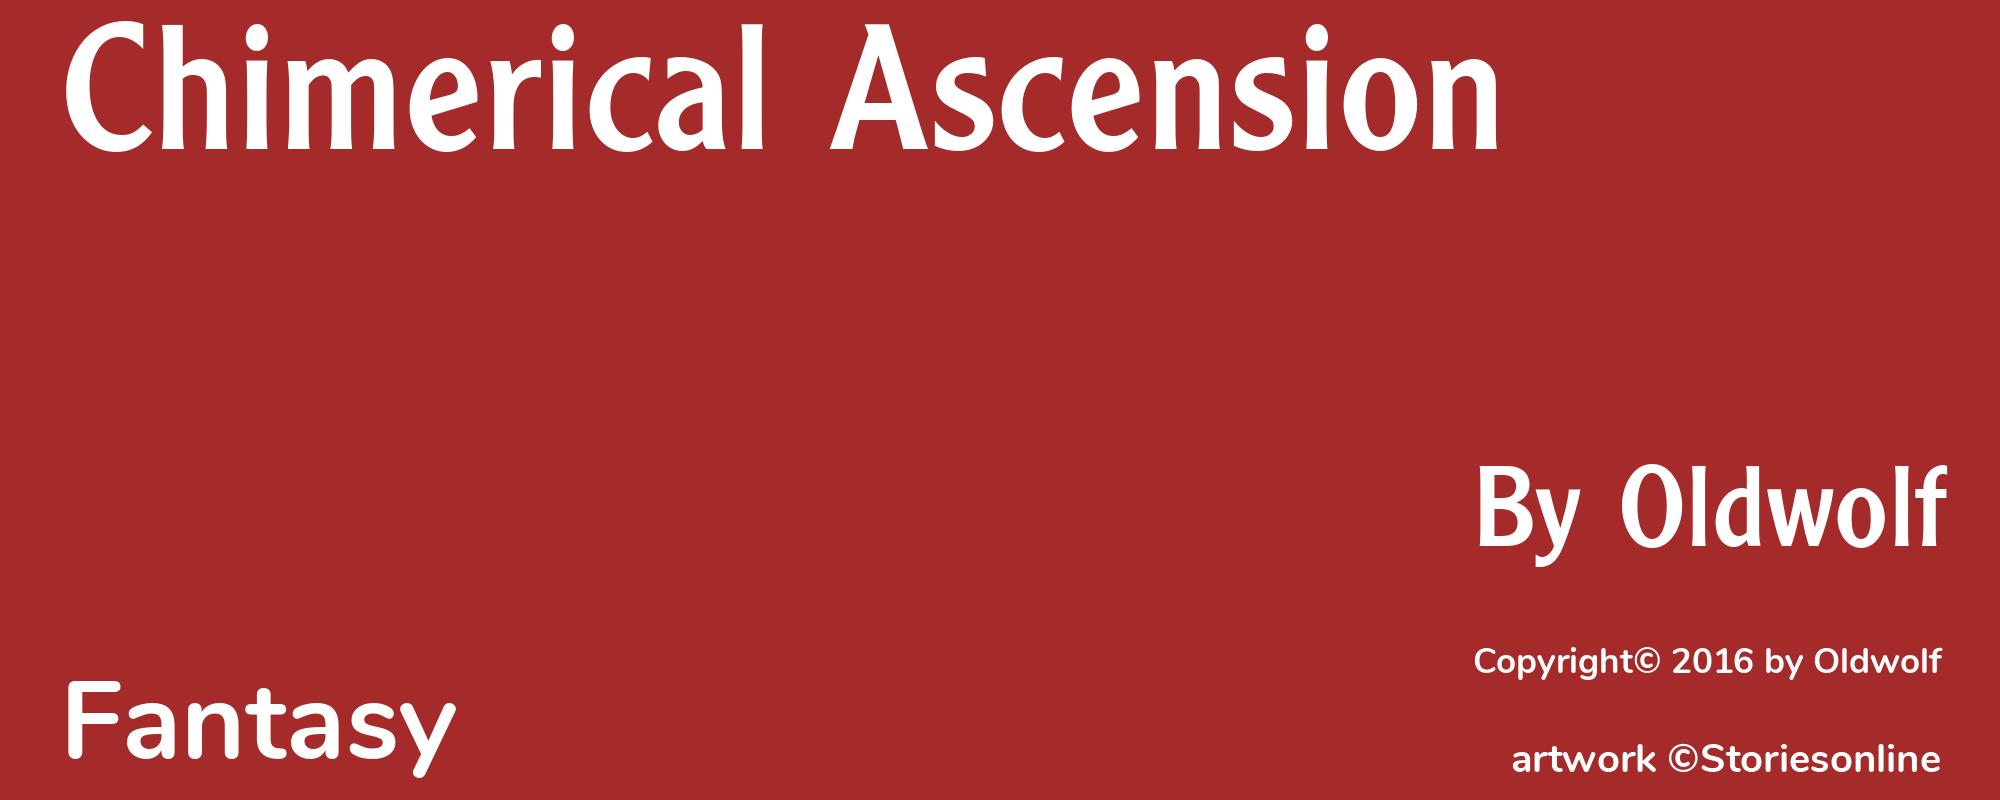 Chimerical Ascension - Cover